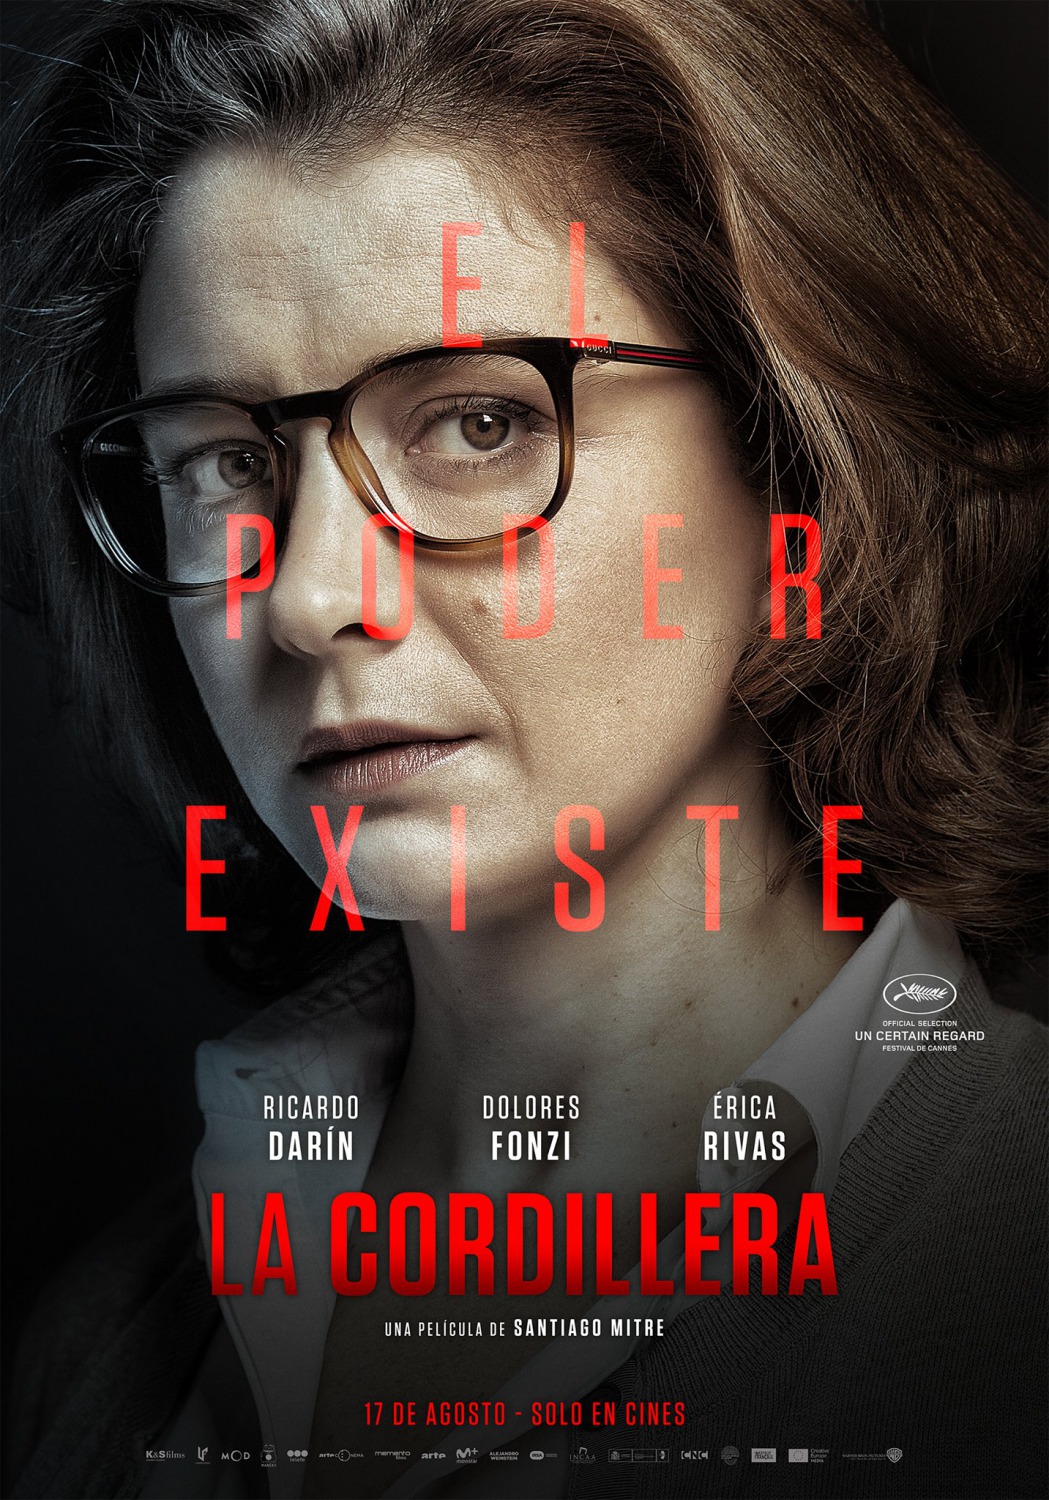 Extra Large Movie Poster Image for La cordillera (#5 of 5)